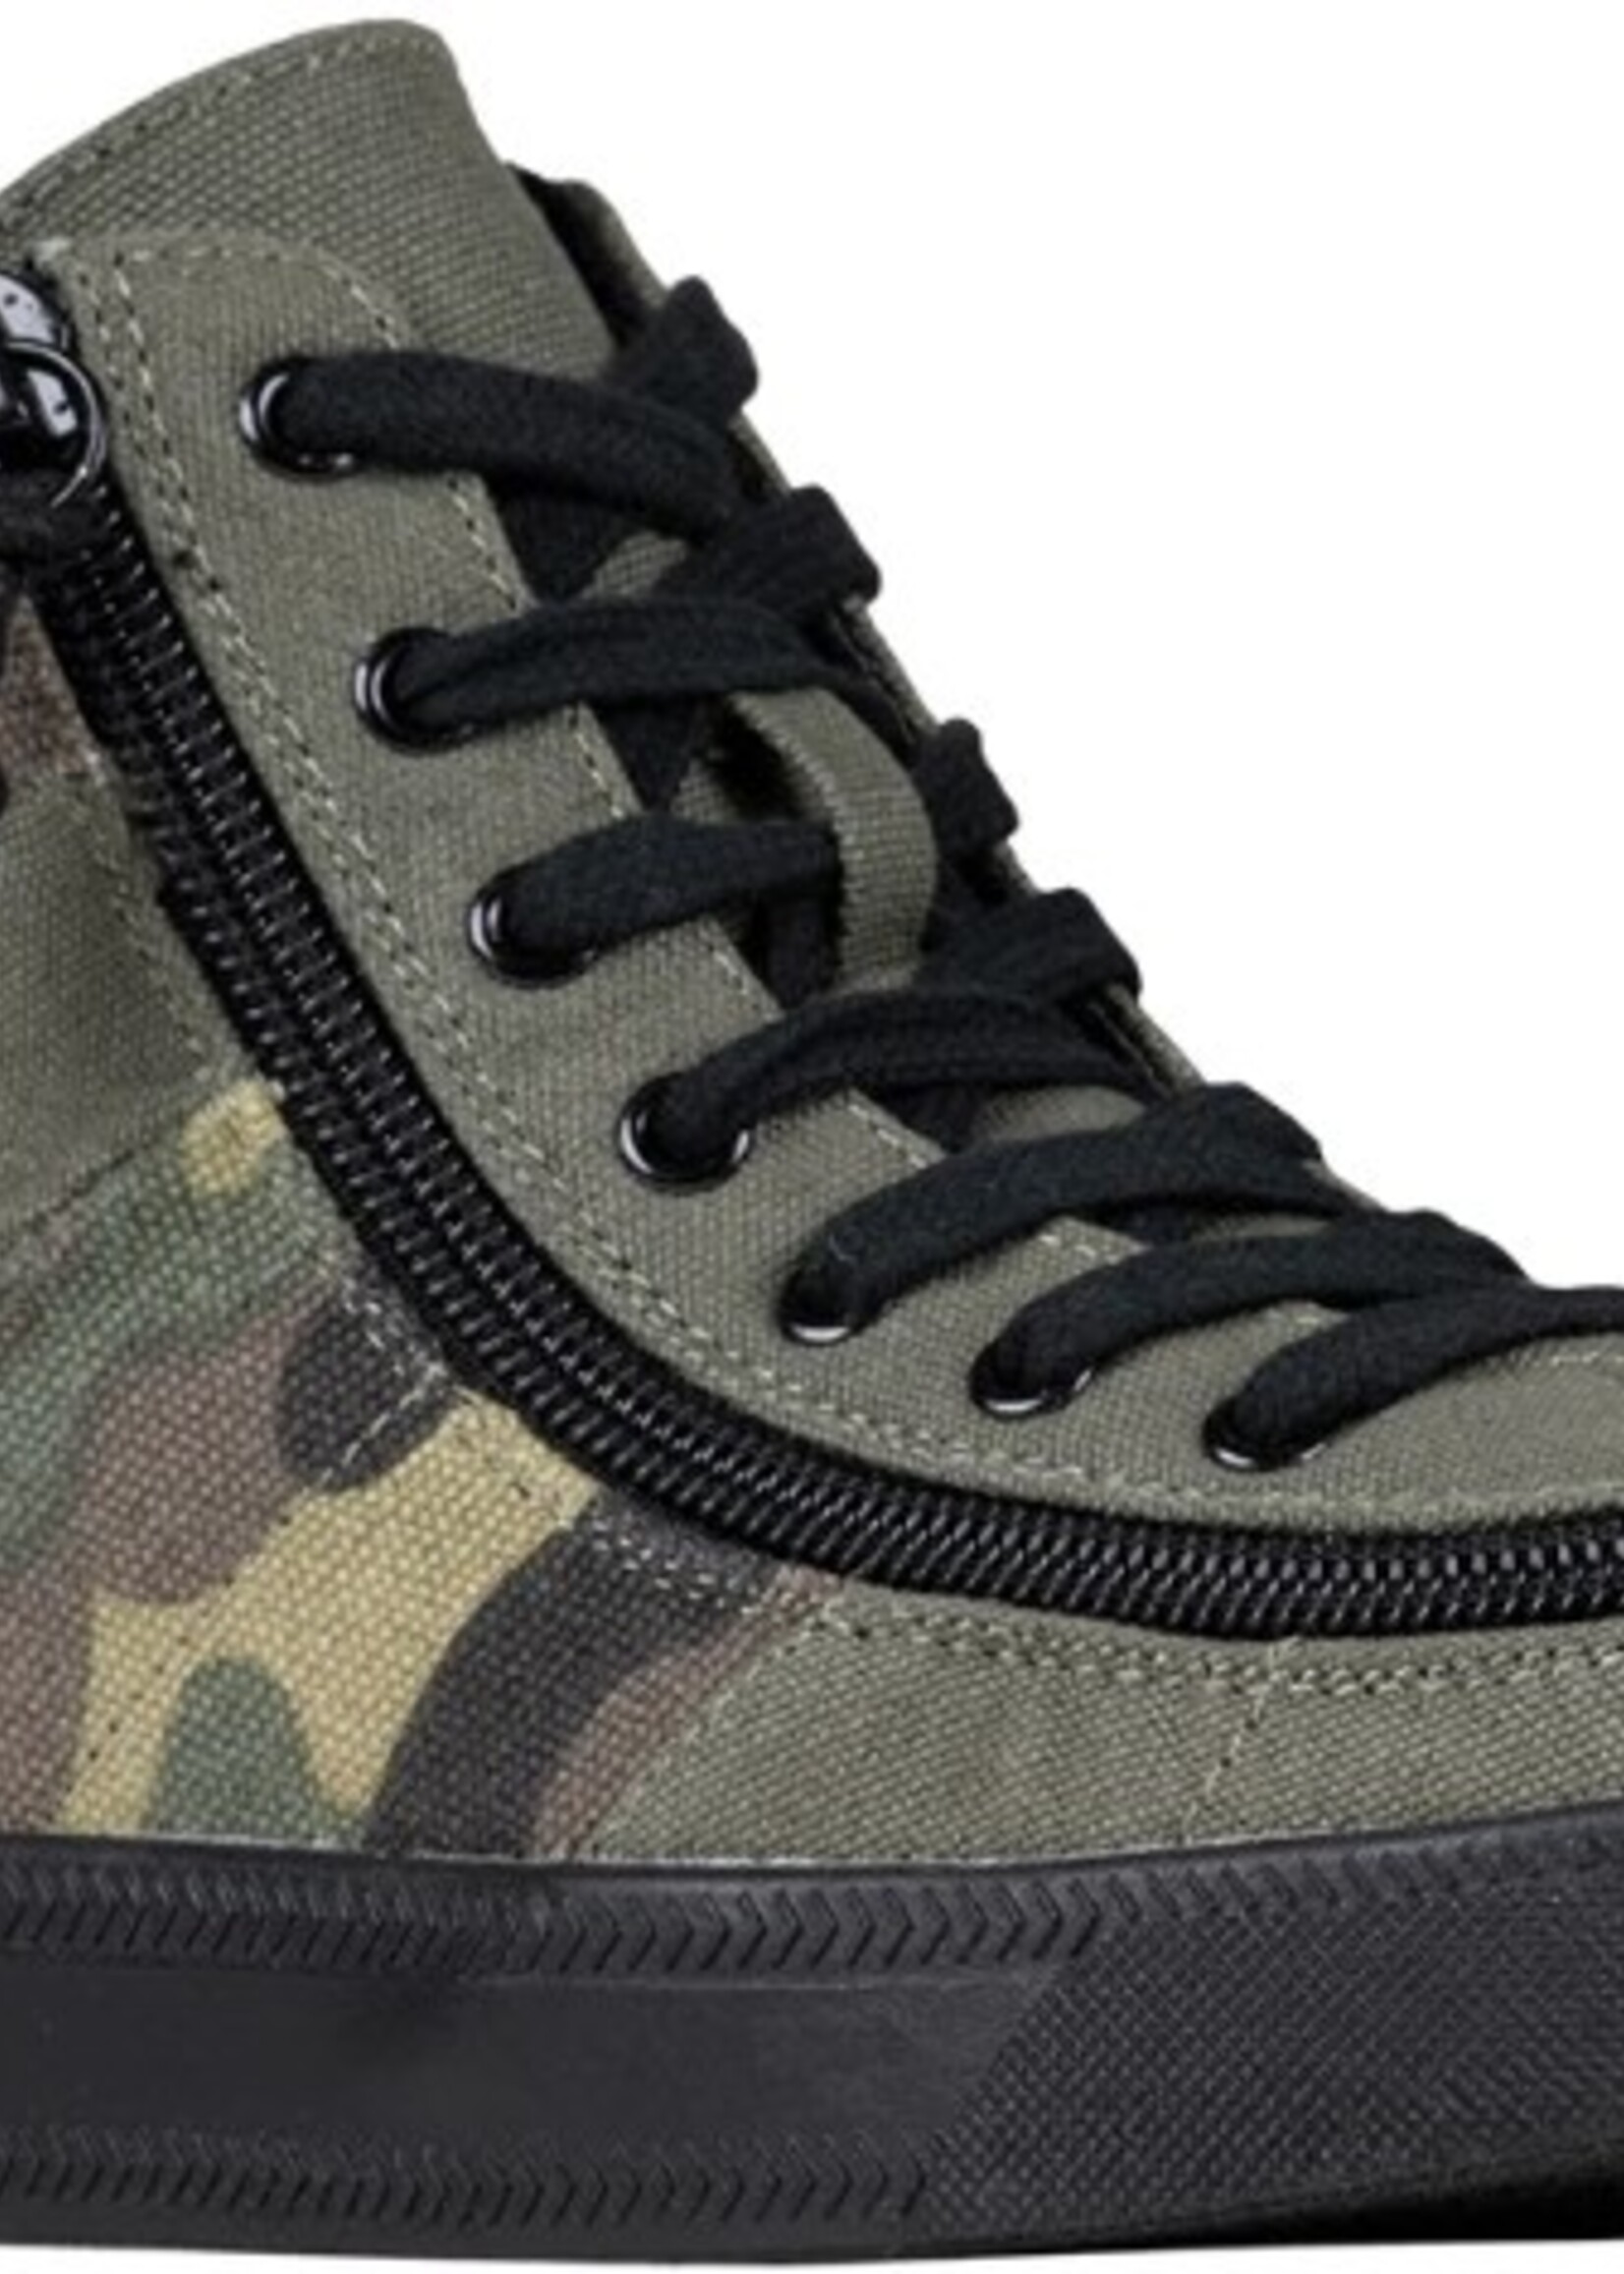 Billy Billy Classic Lace High Olive Camo 5W